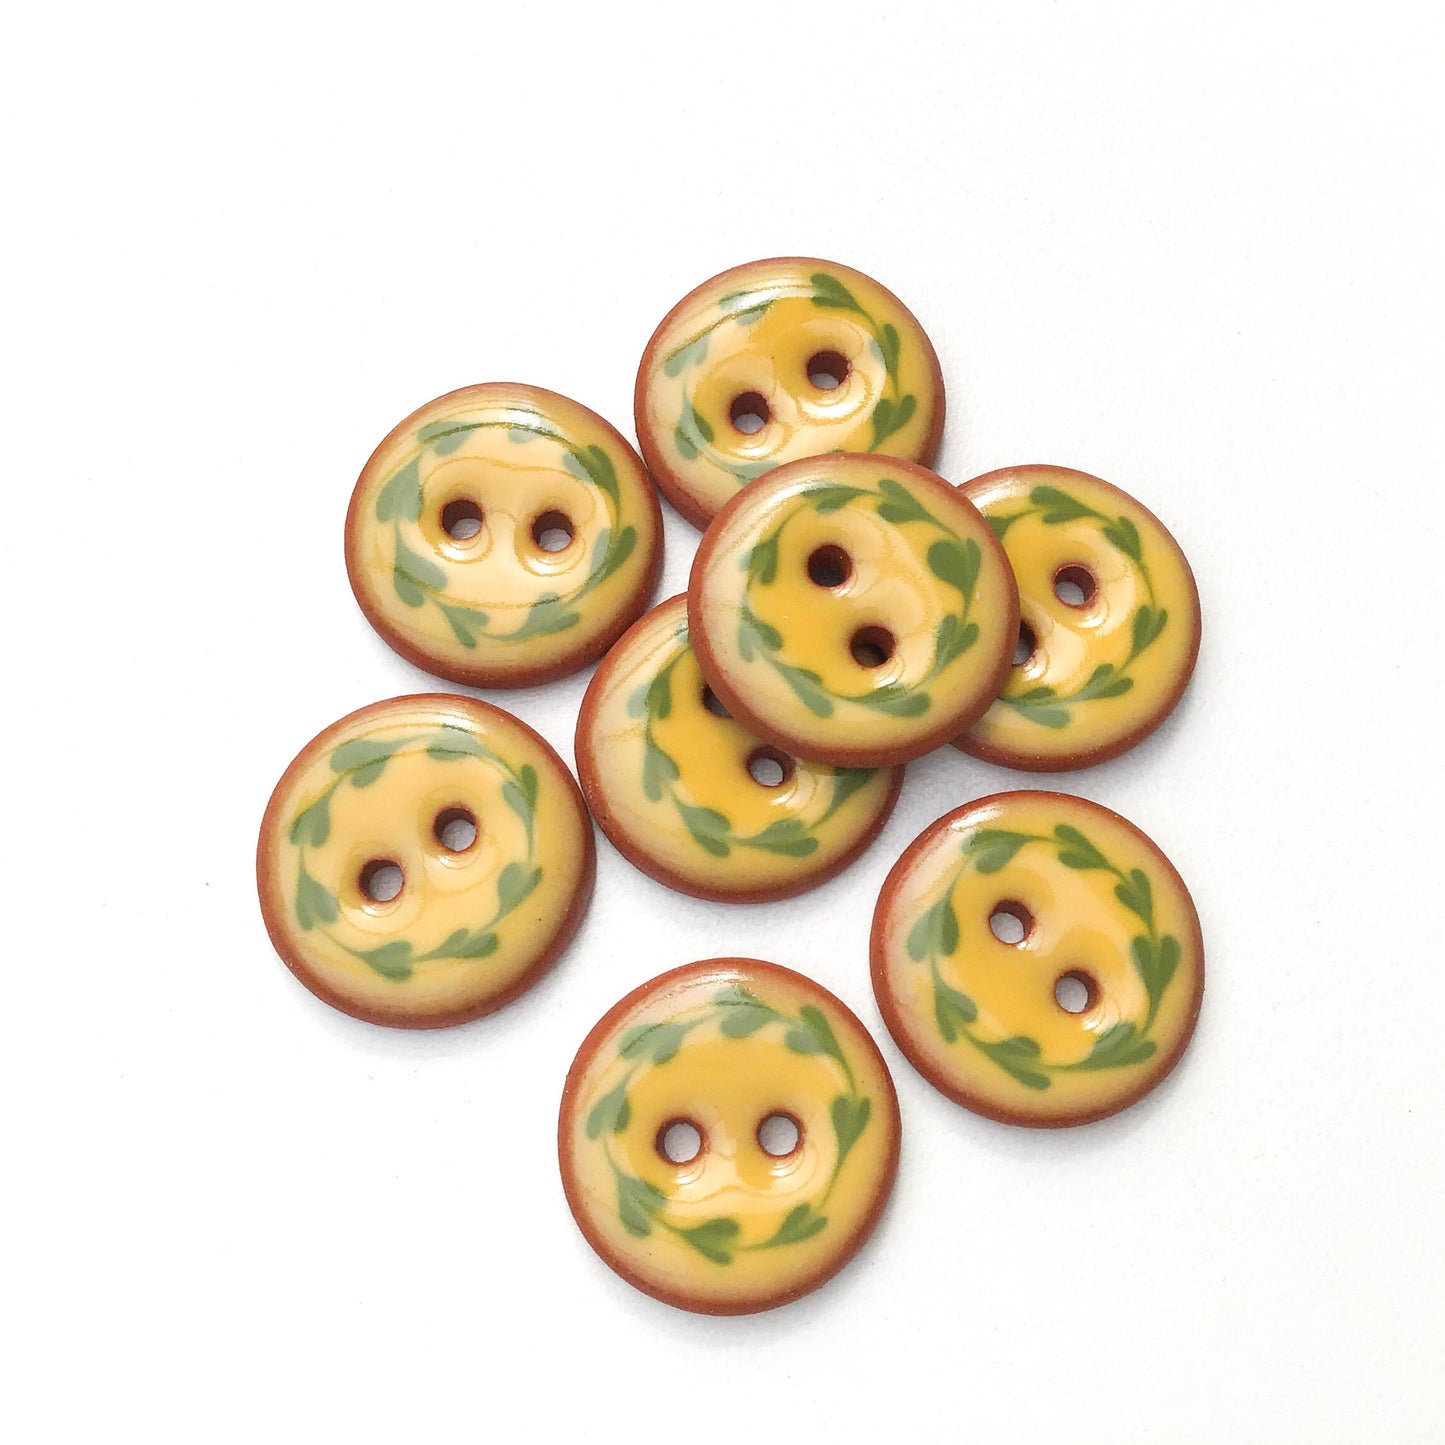 Yellow & Green Floral Wreath Ceramic Buttons - Round Ceramic Buttons - 3/4" - 8 Pack